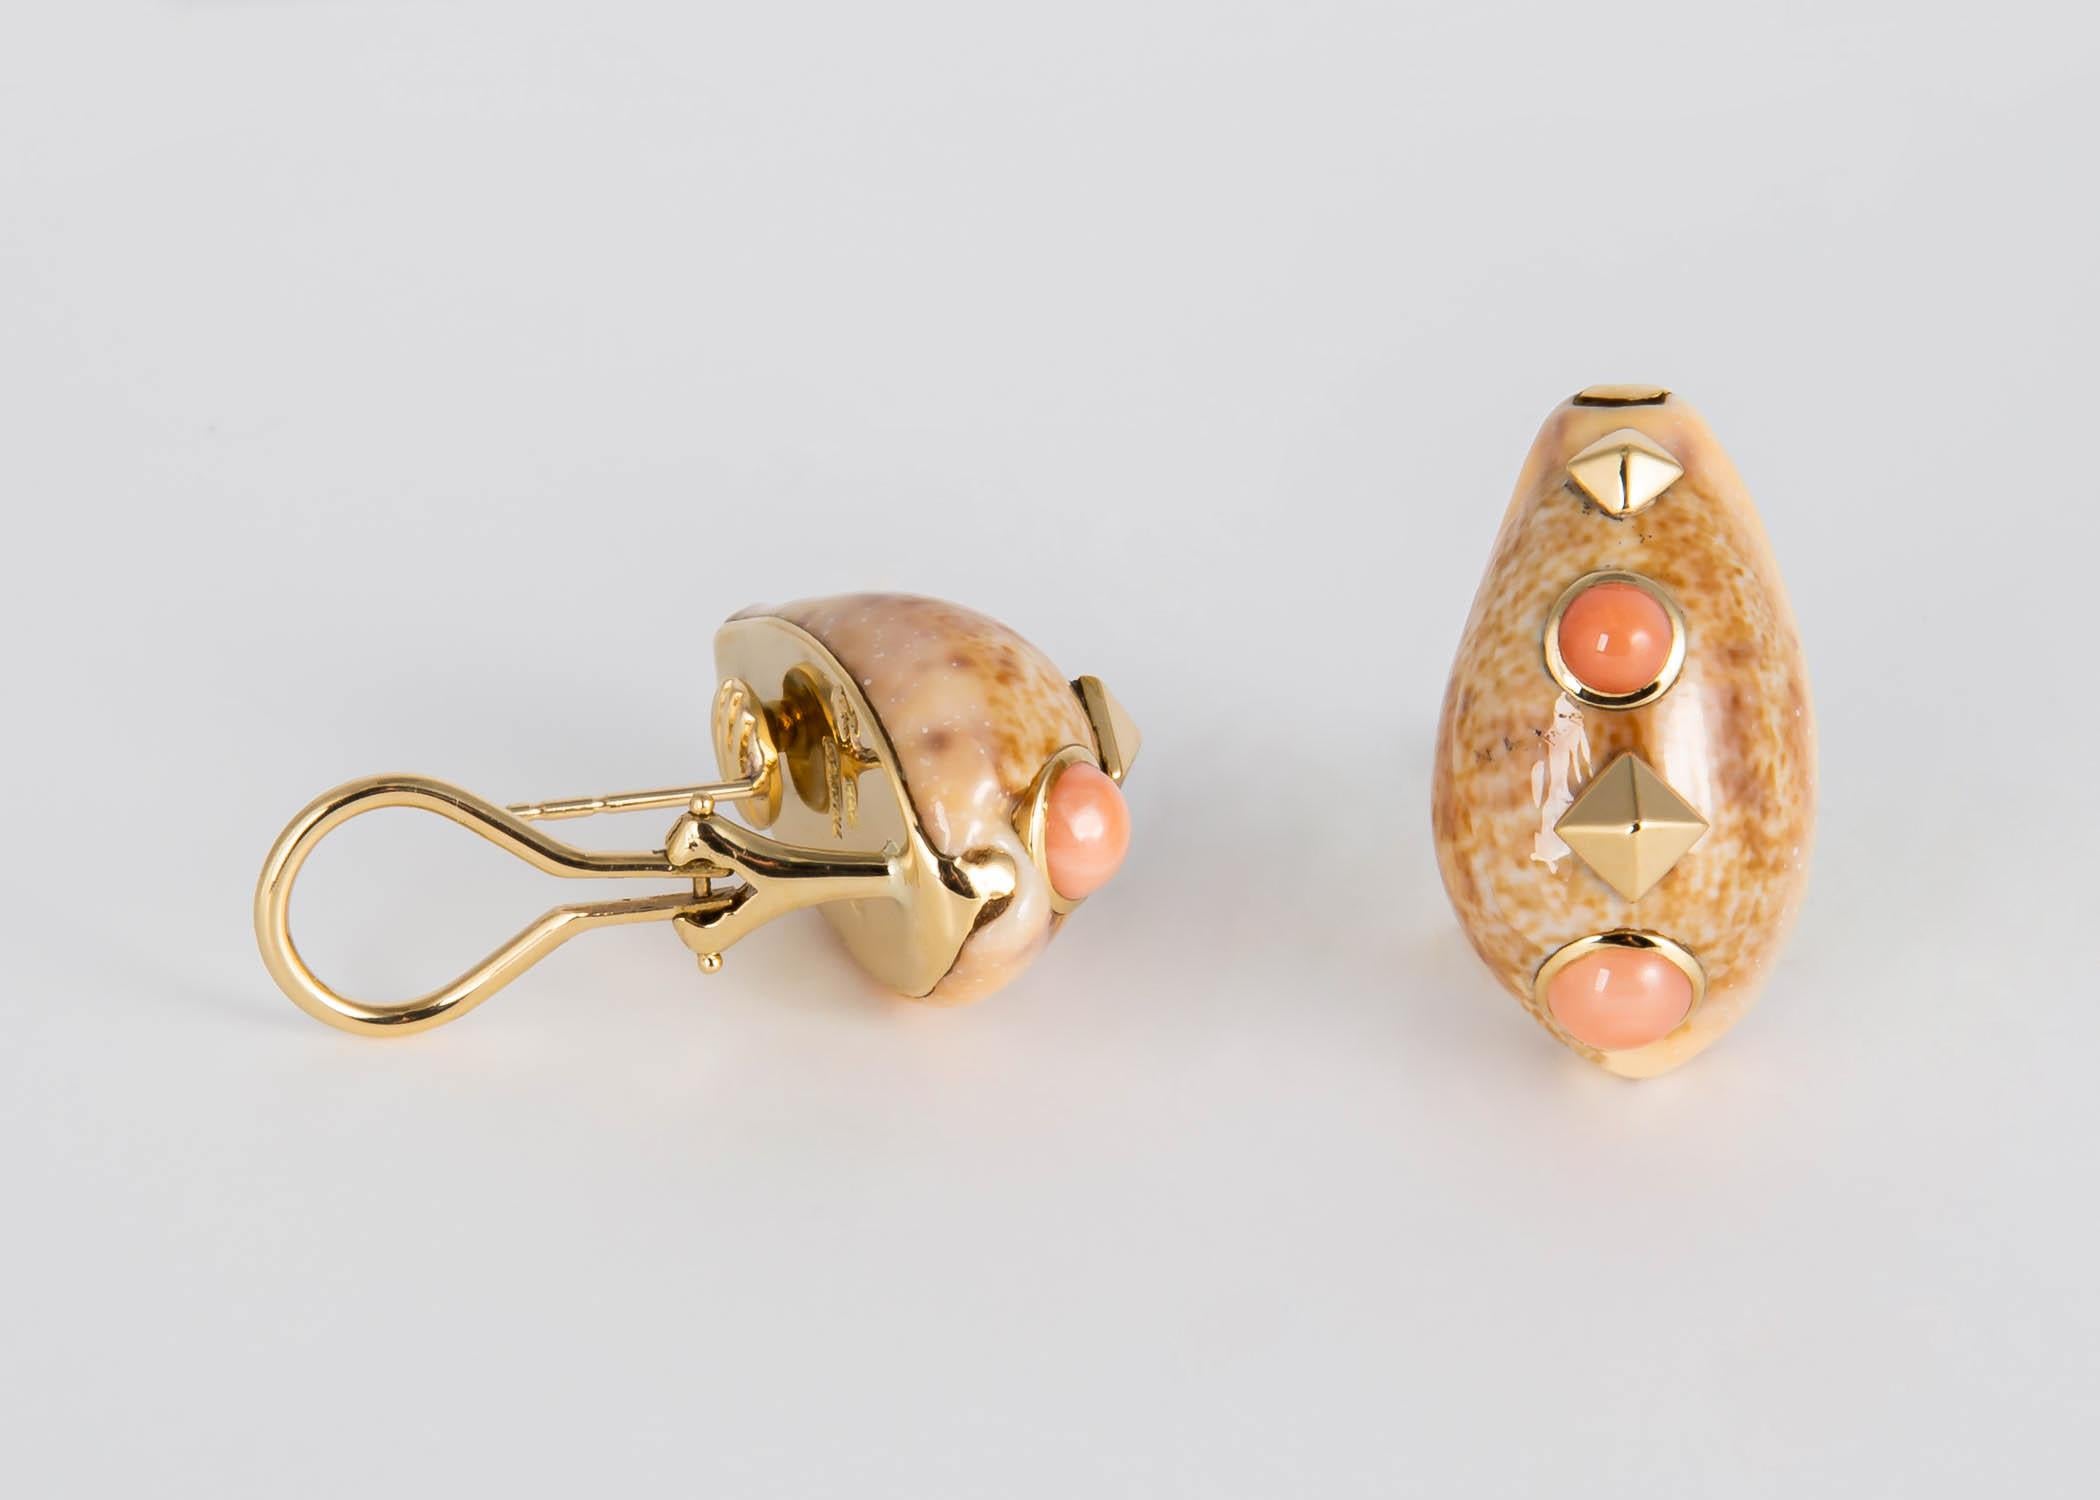 Trianon the sister company to Seaman Schepps is known for their beautiful natural shell earrings. This soft tan colored shell is accented with 18k gold and pinkish orange coral.  1 inch in size. 